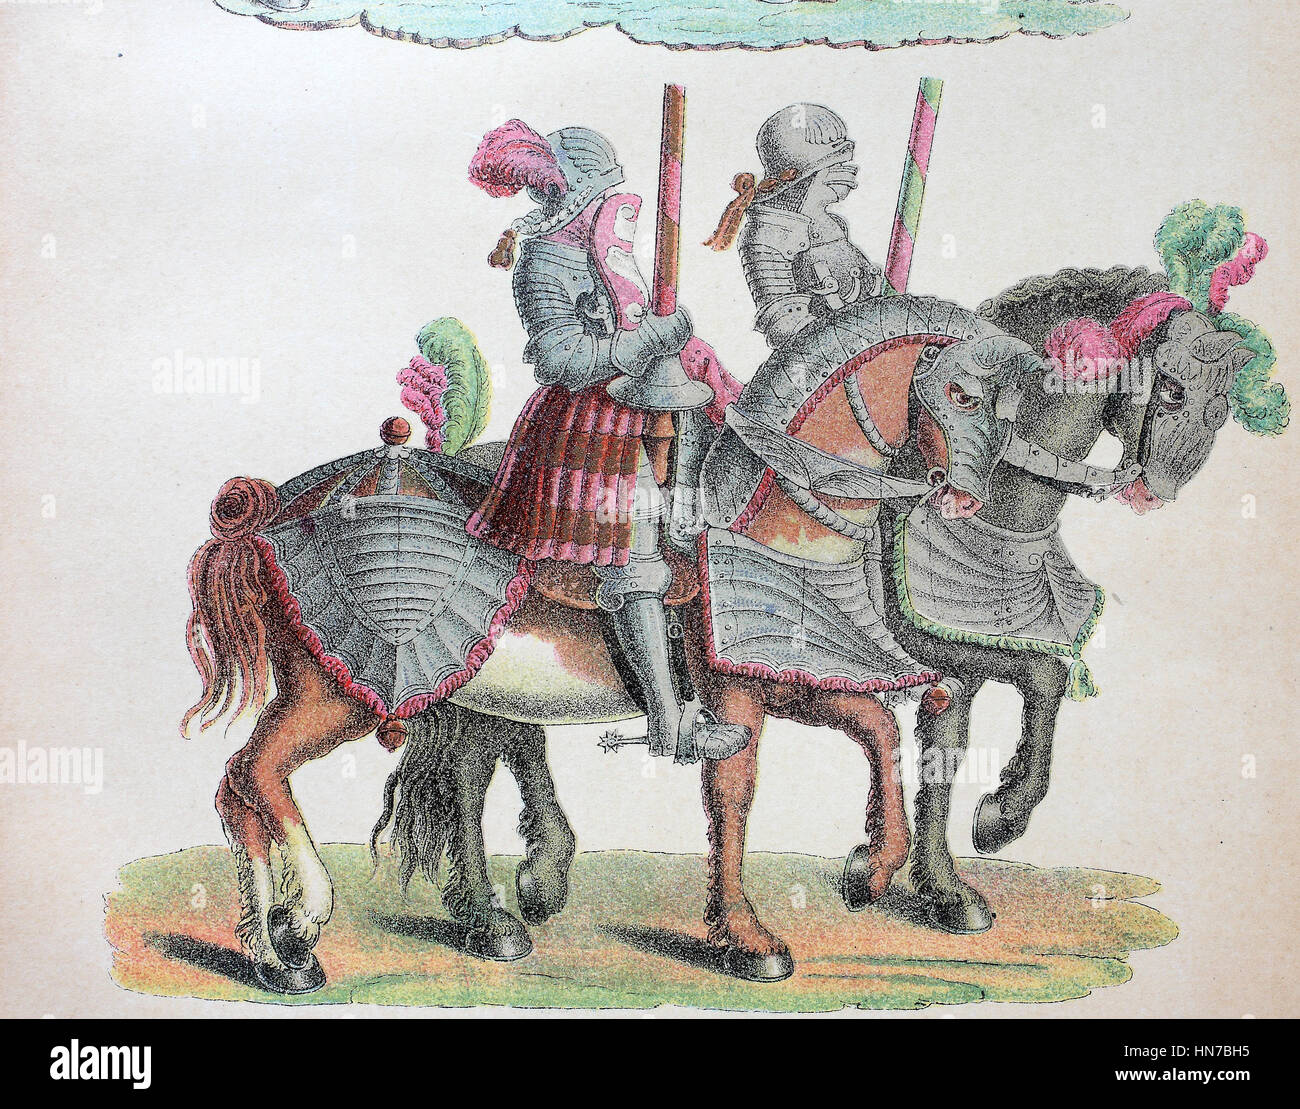 Knights with horses move to the tournament, from the tournament book of Emperor Maximilian, Ritter mit Pferd ziehen zum Turnier, aus dem Turnierbuch von Kaiser Maximilian, woodcut from 1885, digital improved Stock Photo